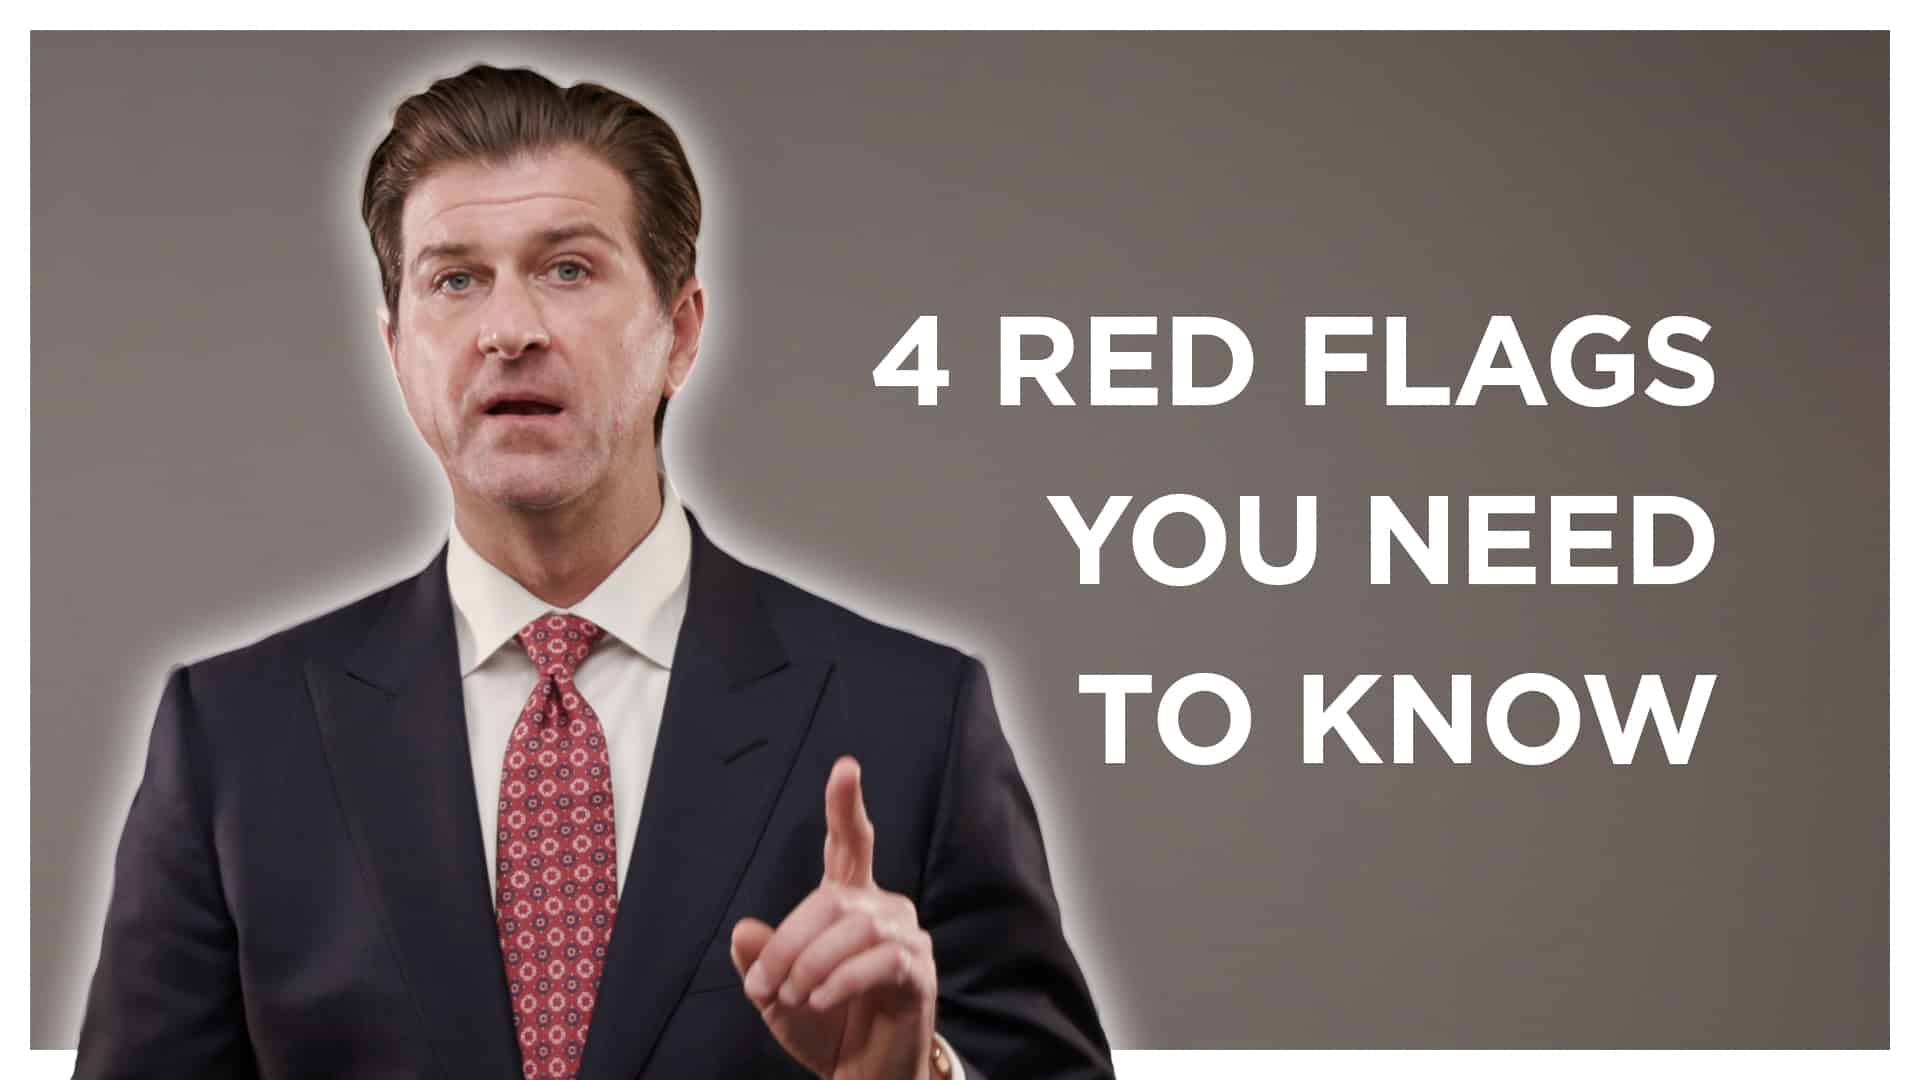 What Red Flags Should You Watch Out For Before Choosing A Lawyer To Handle Your Case?